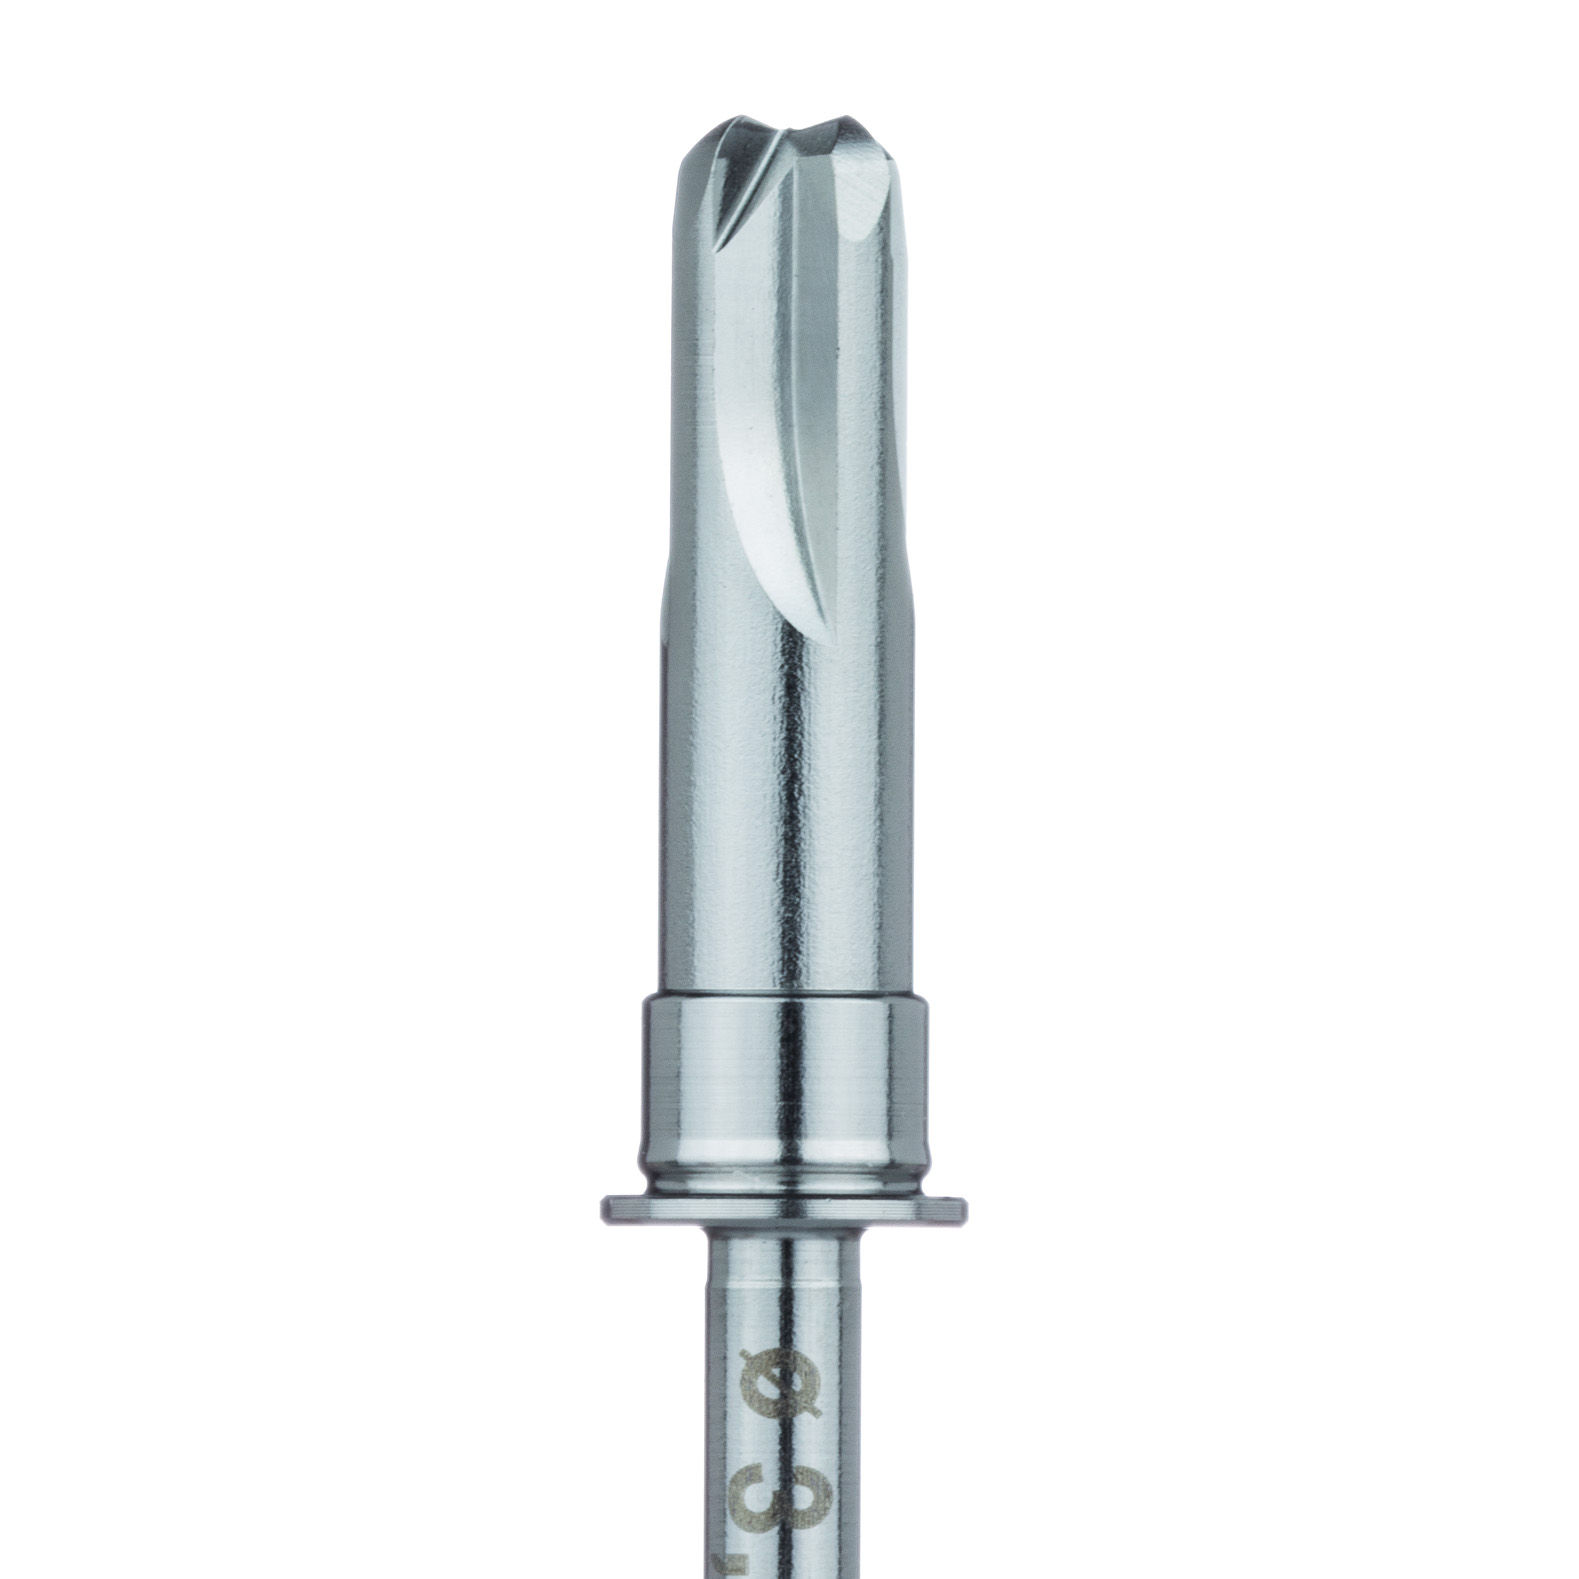 CL006 Surgery, Crestal Drill with Stop, 3.8mm Ø, RAXL